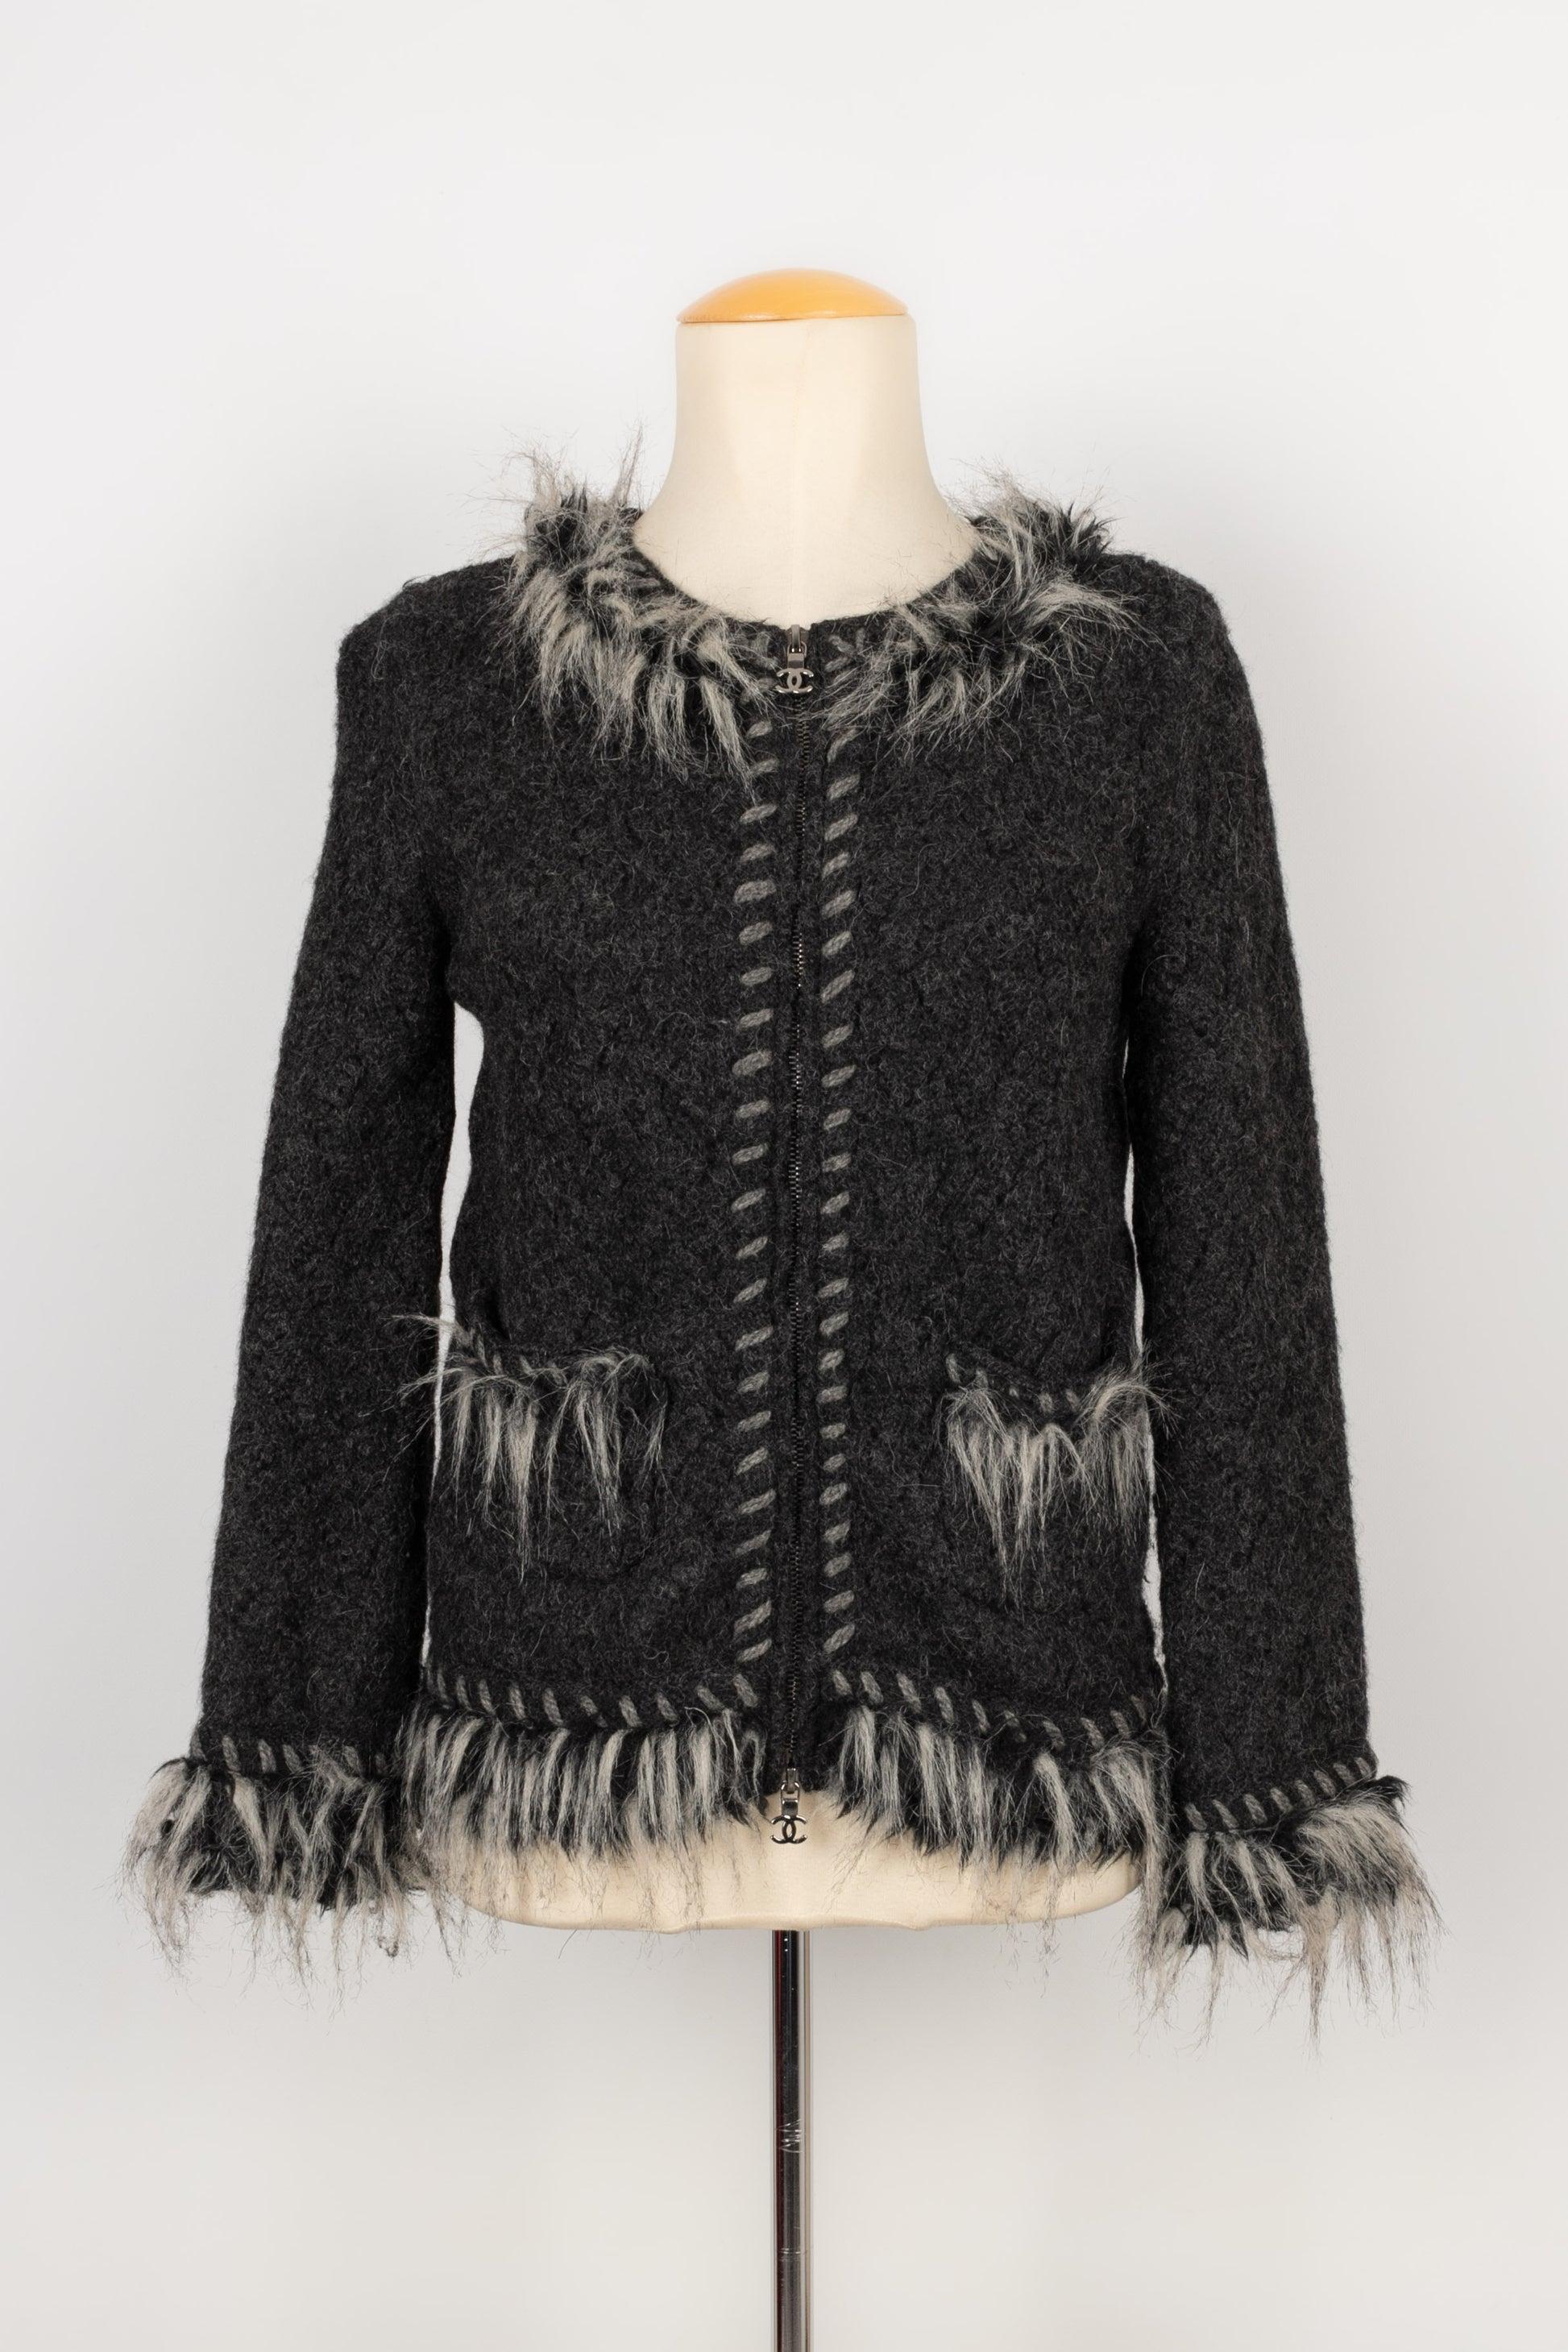 Chanel Alpaca and Cashmere Jacket Embroidered with Faux Fur For Sale